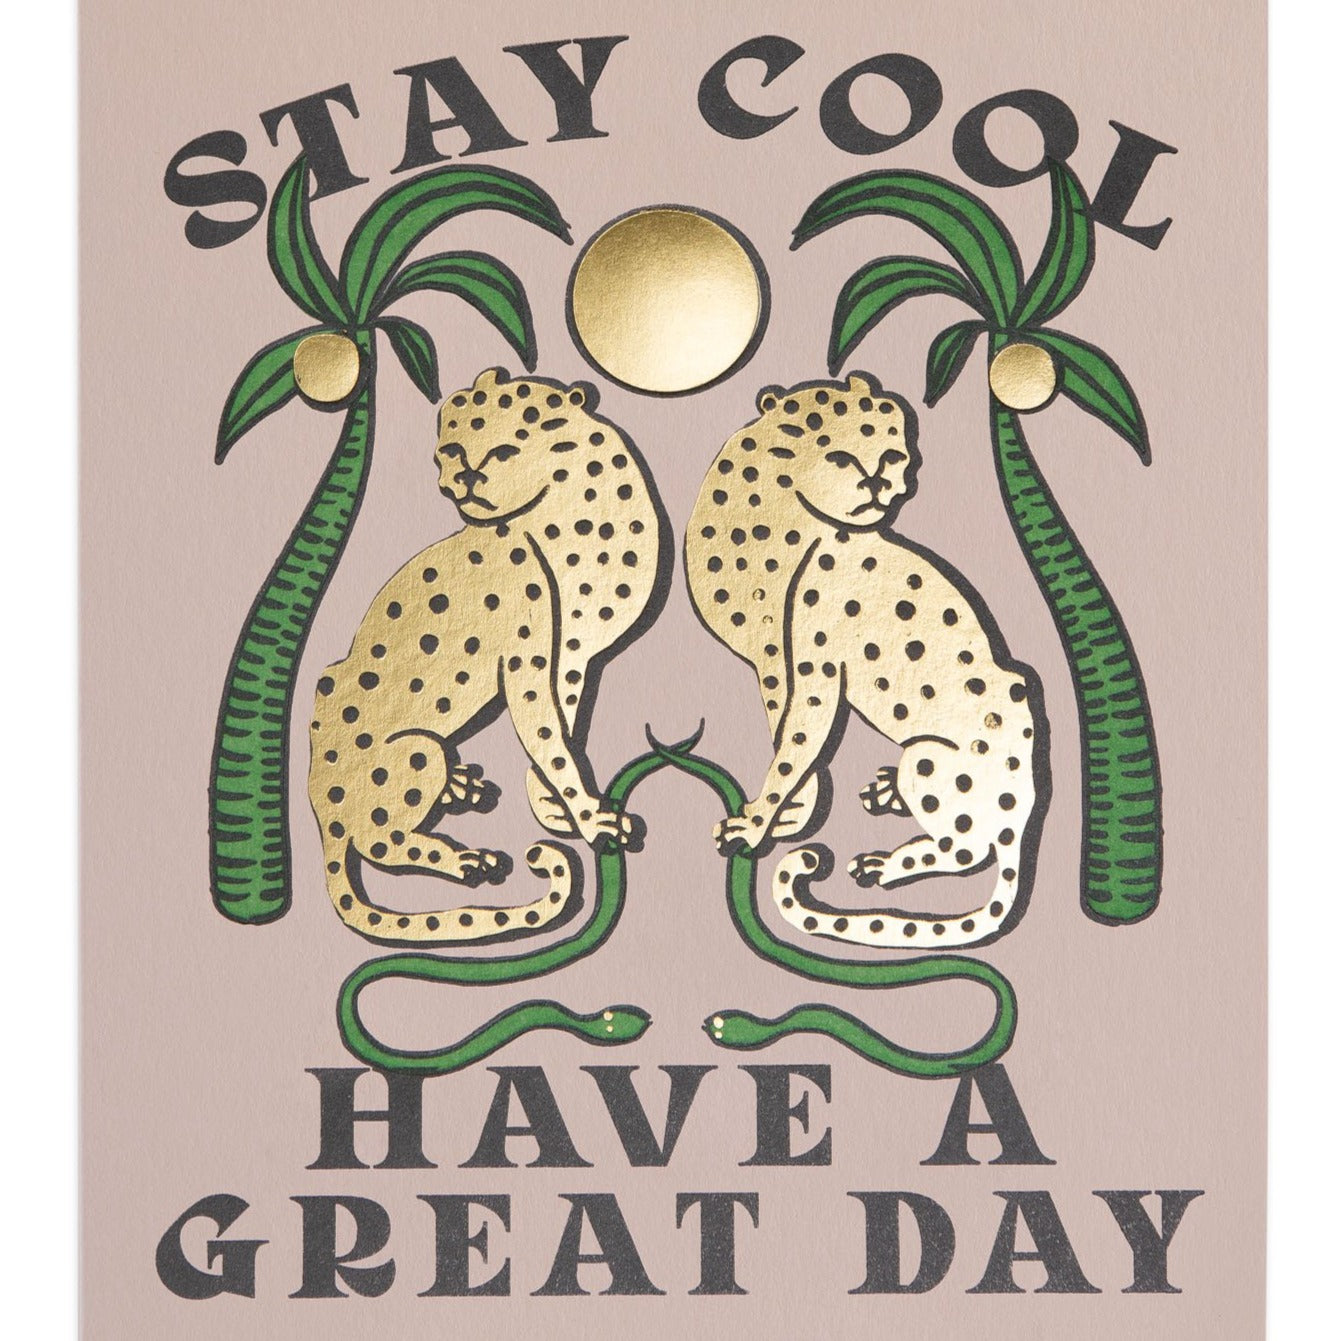 Stay Cool card